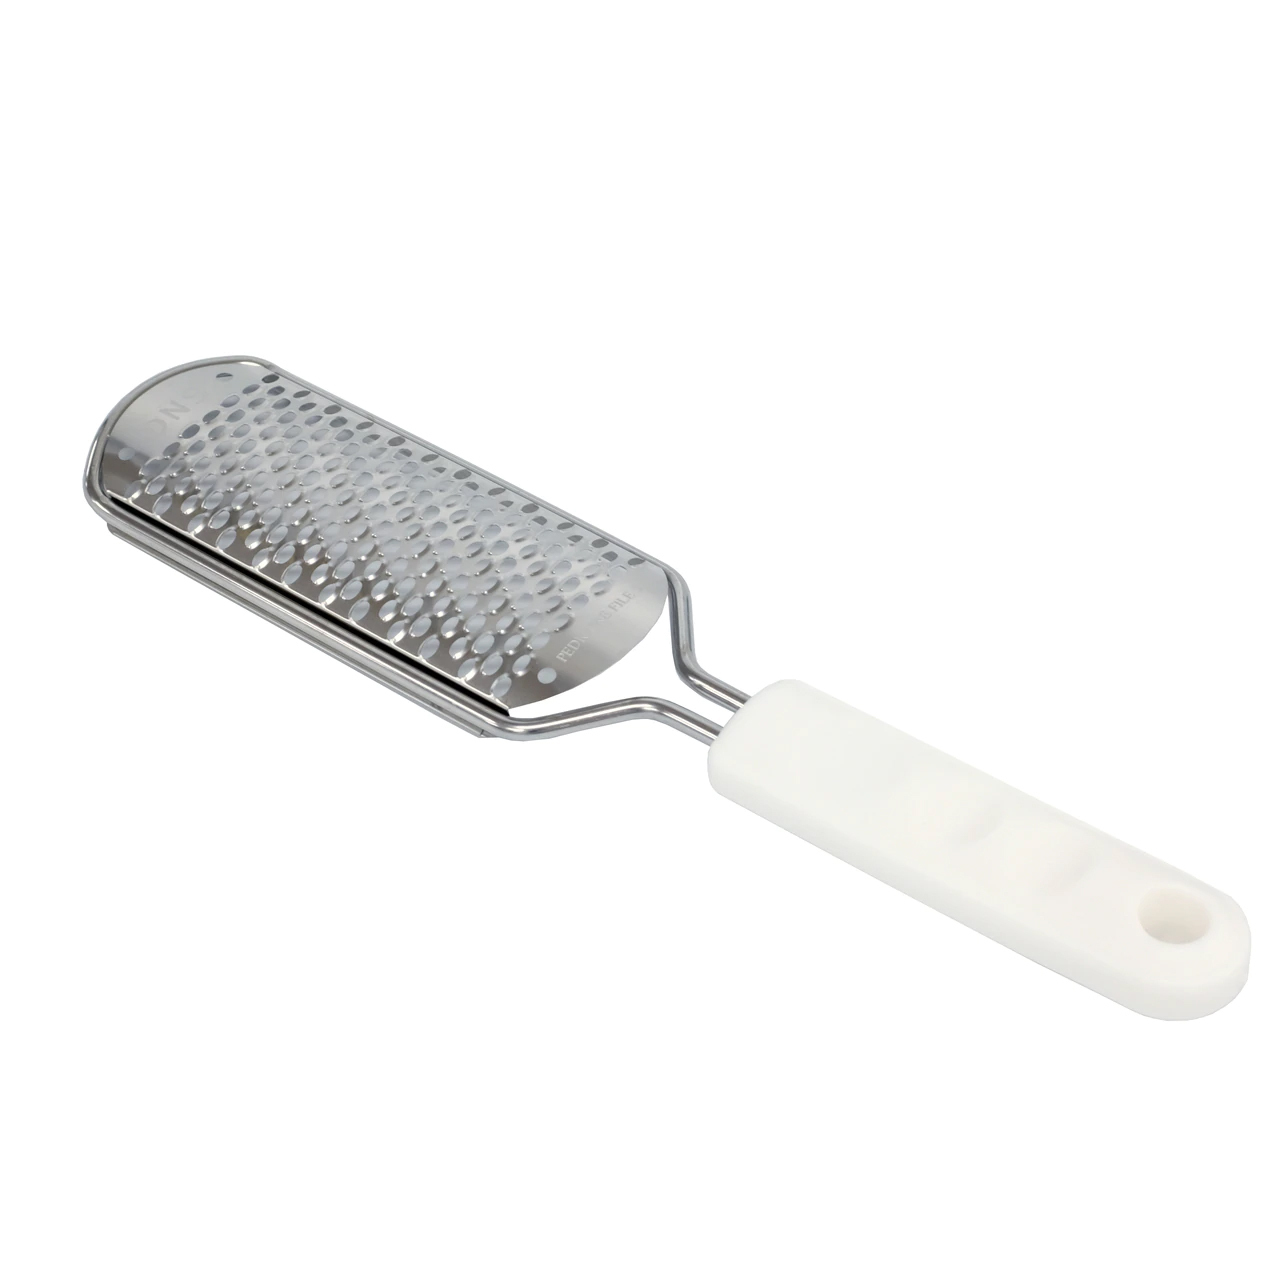  BEINY Stainless Steel Callus Shaver Pedicure Dead